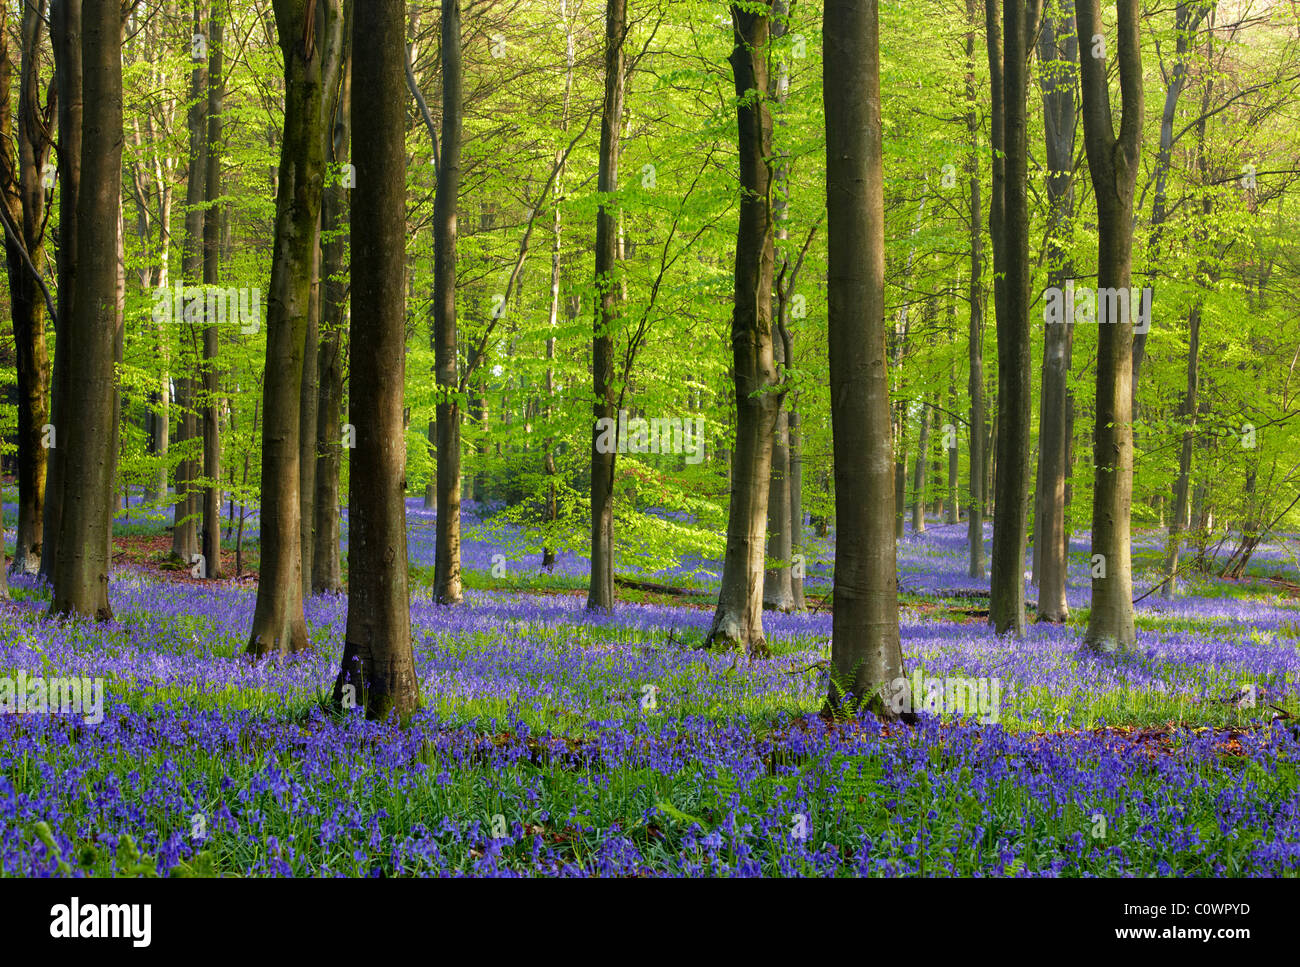 Ancient beech tree woodland during spring. Bluebells carpet the woodland floor. Stock Photo